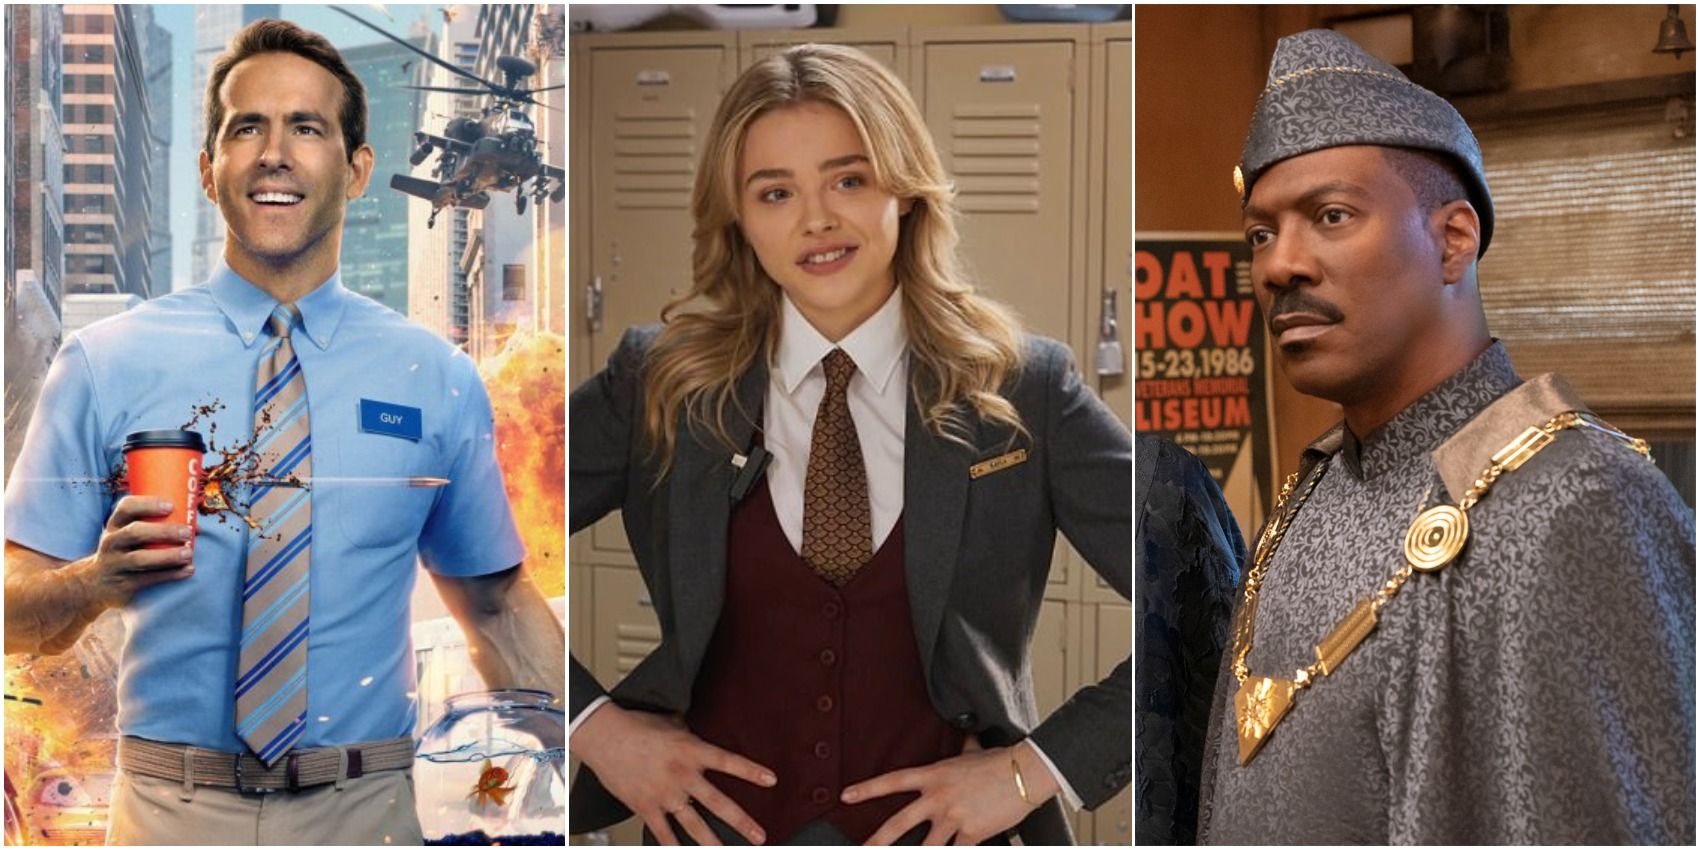 What are the top 10 comedy movies of 2021?